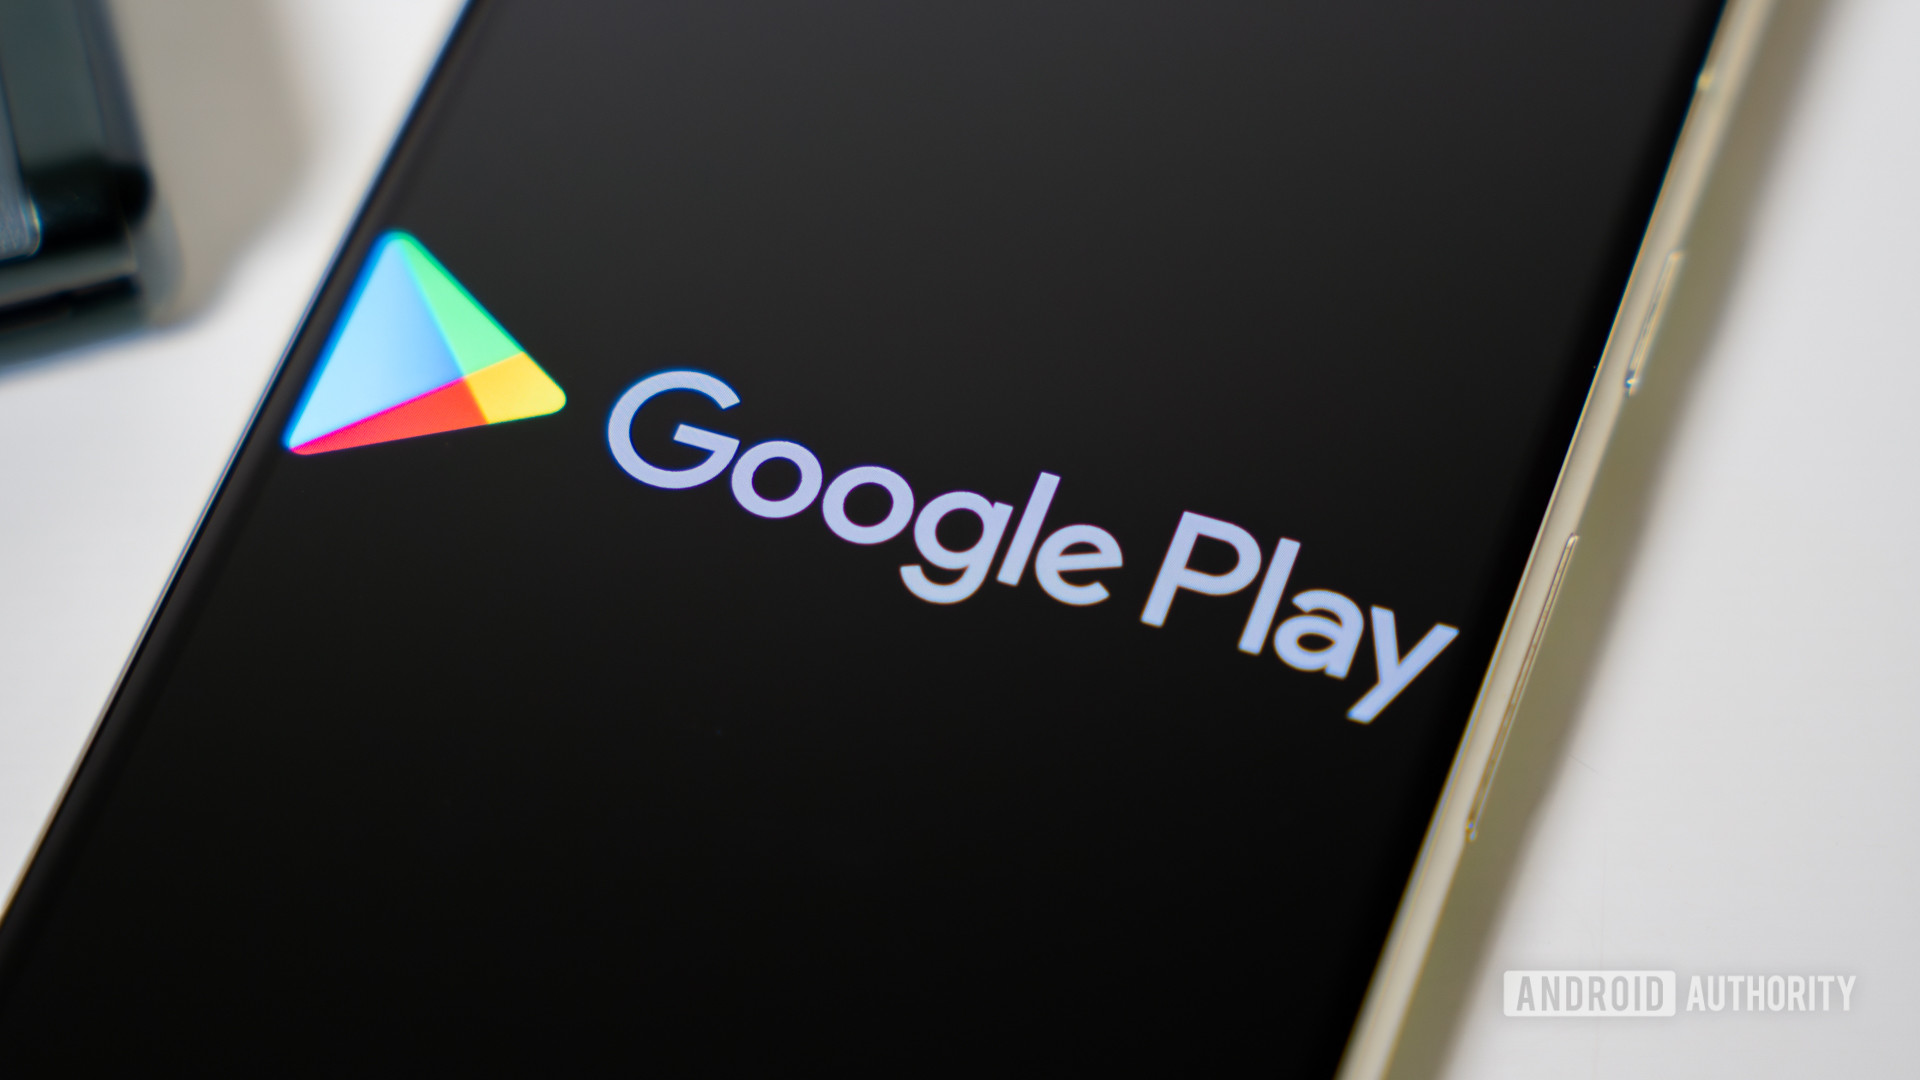 Black Background - Apps on Google Play